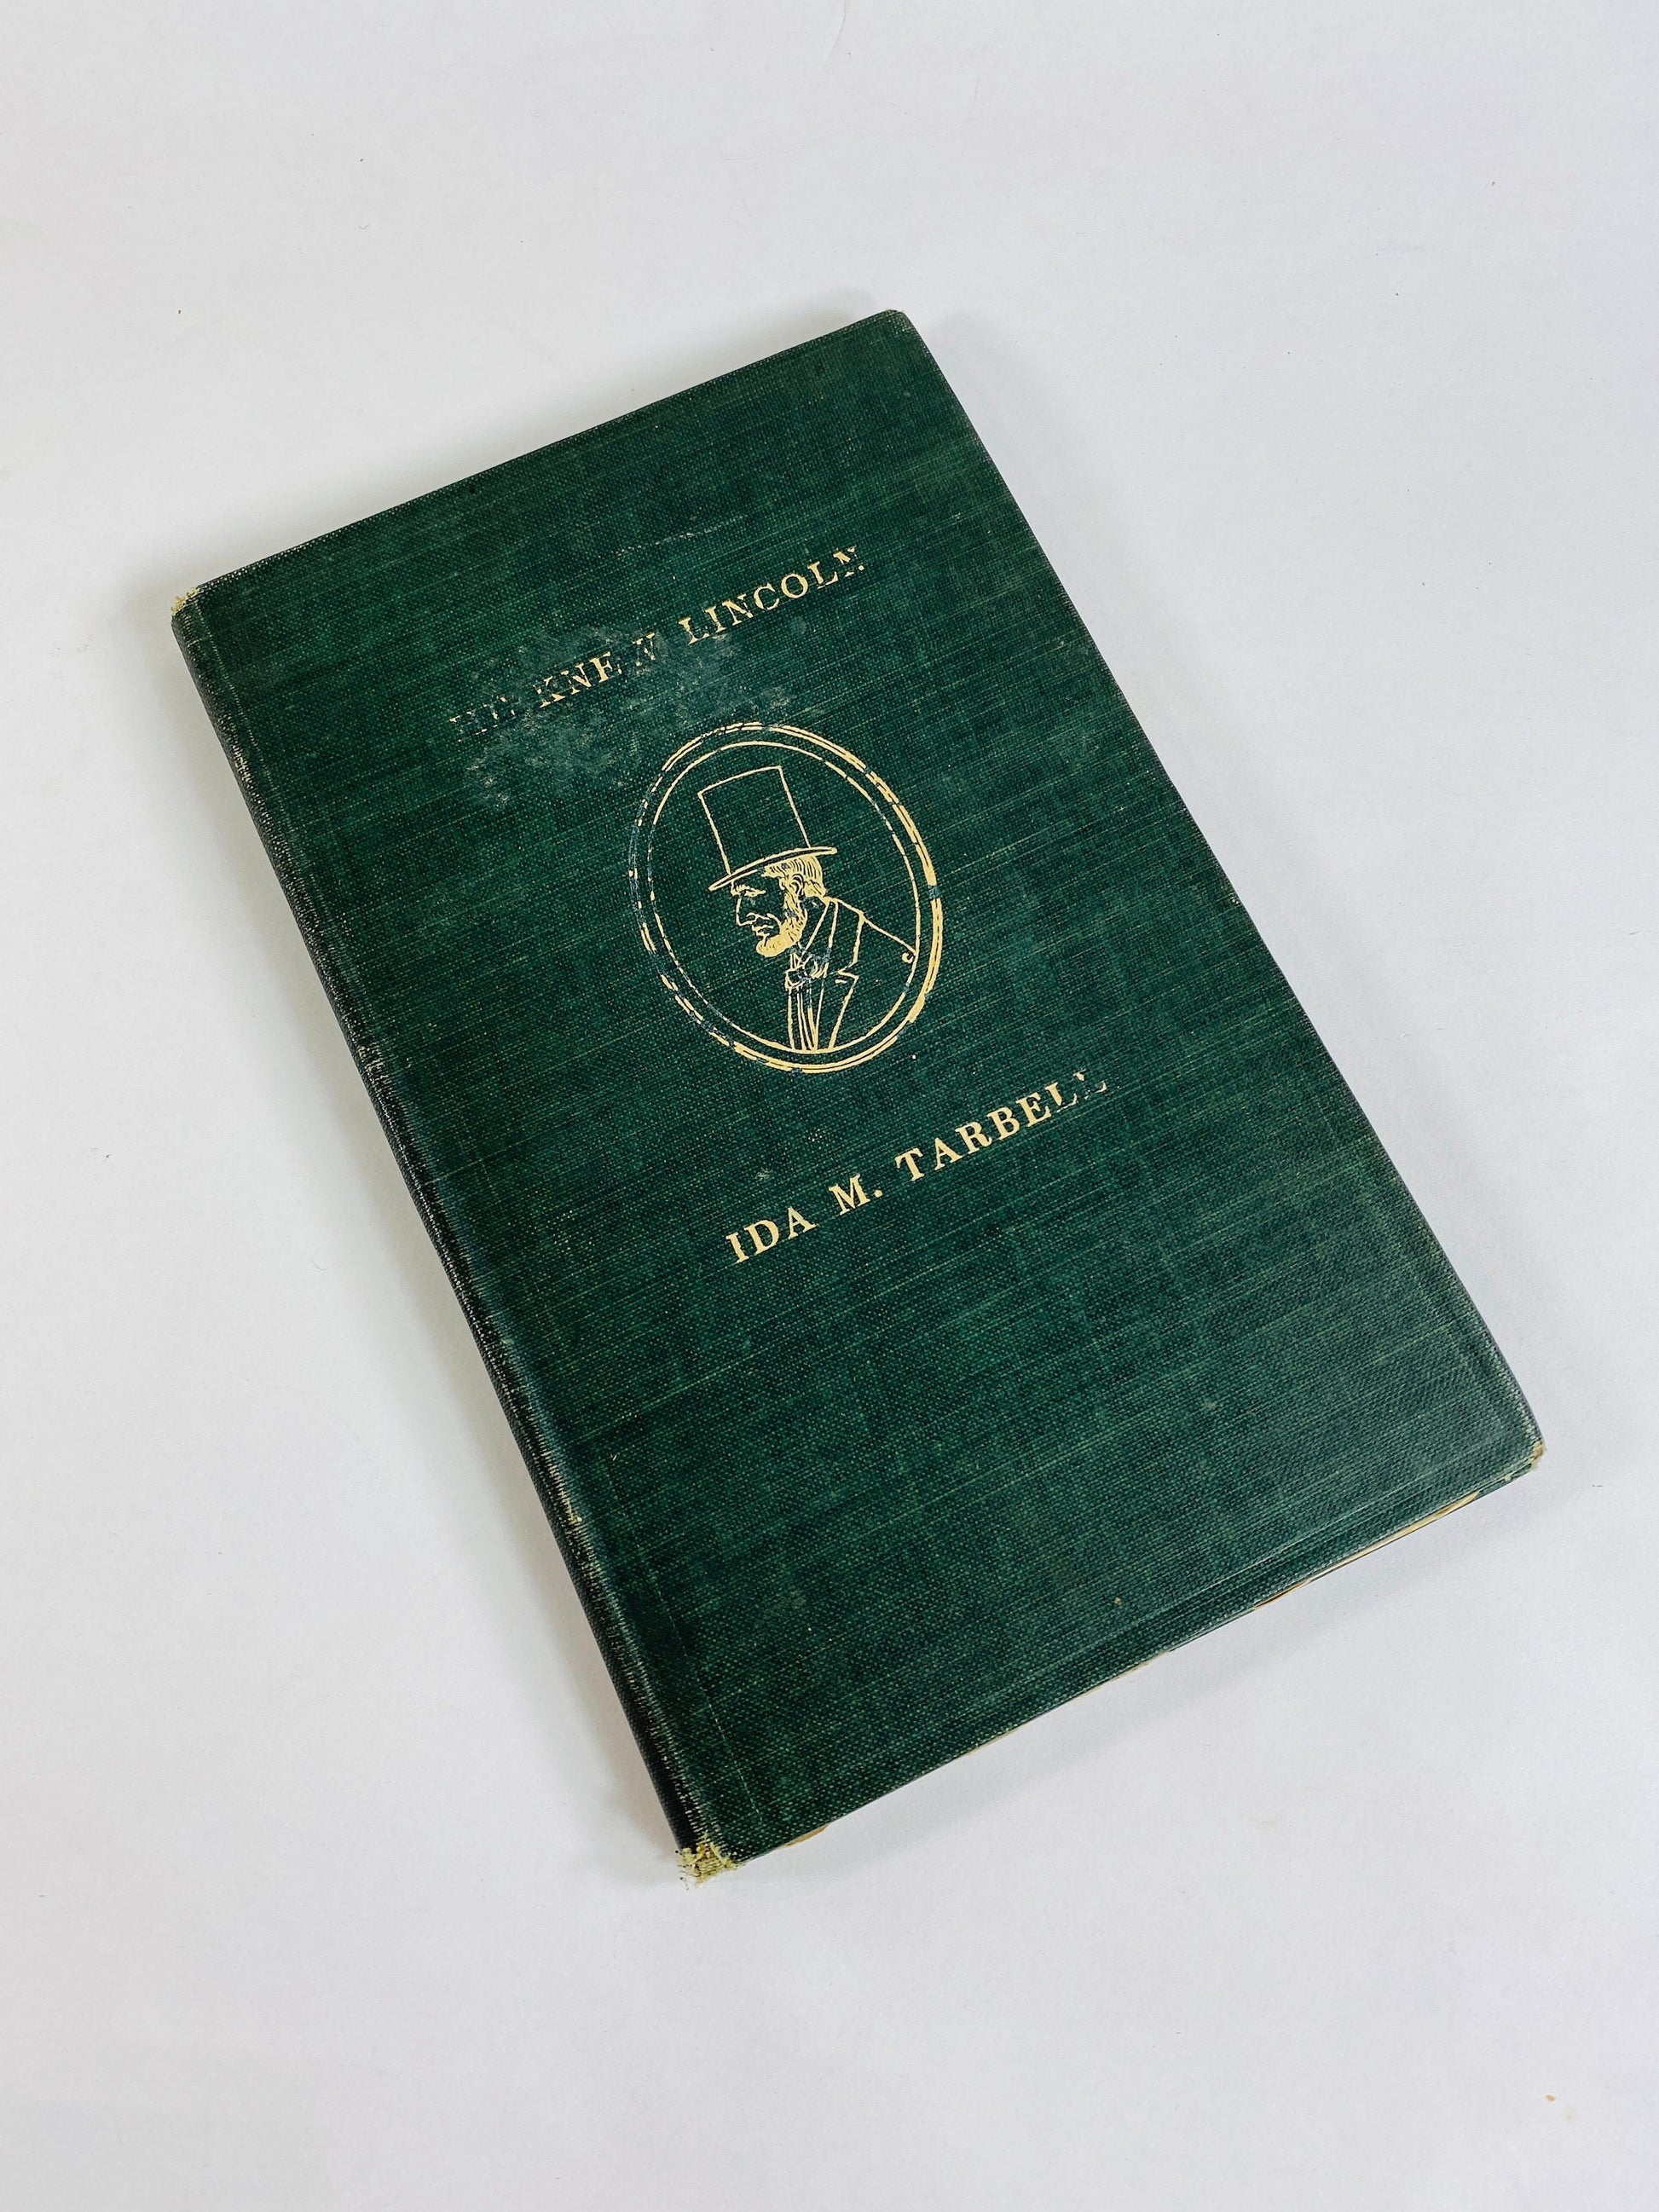 Small green vintage book about Abraham Lincoln written by Ida Tarbell in 1908. First Edition